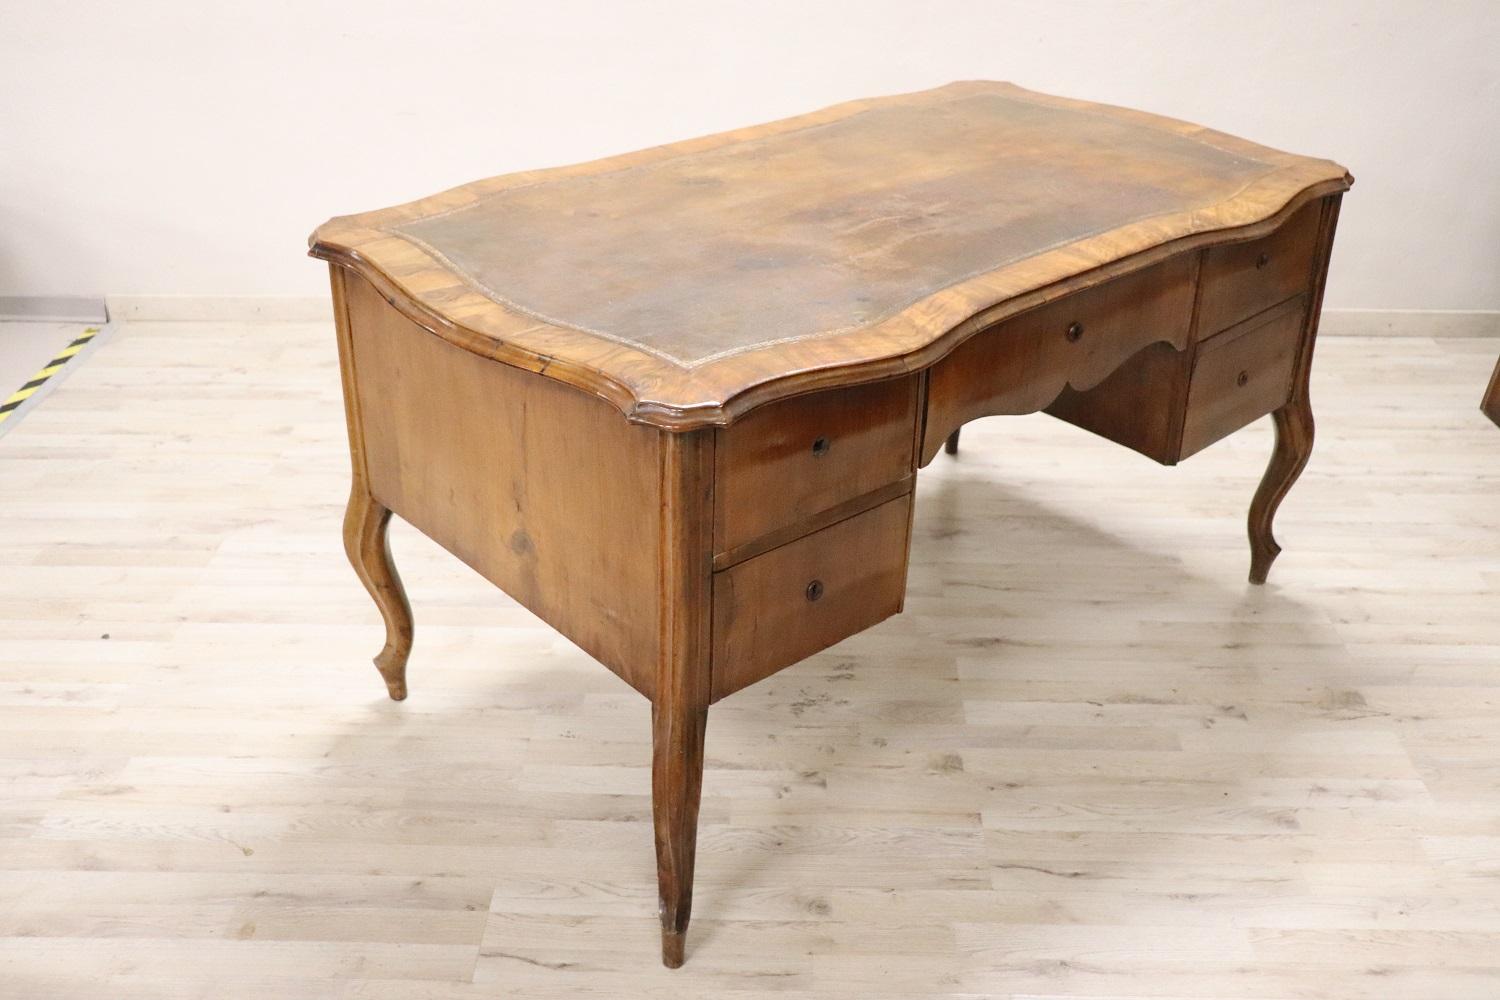 Majestic antique Italian louis XV style large writing desk. Rare and precious walnut wood. Comfortable size for a practical use. The desk has elegant elegant wavy legs. Equipped with five practical drawers. The top is lined in original brown leather